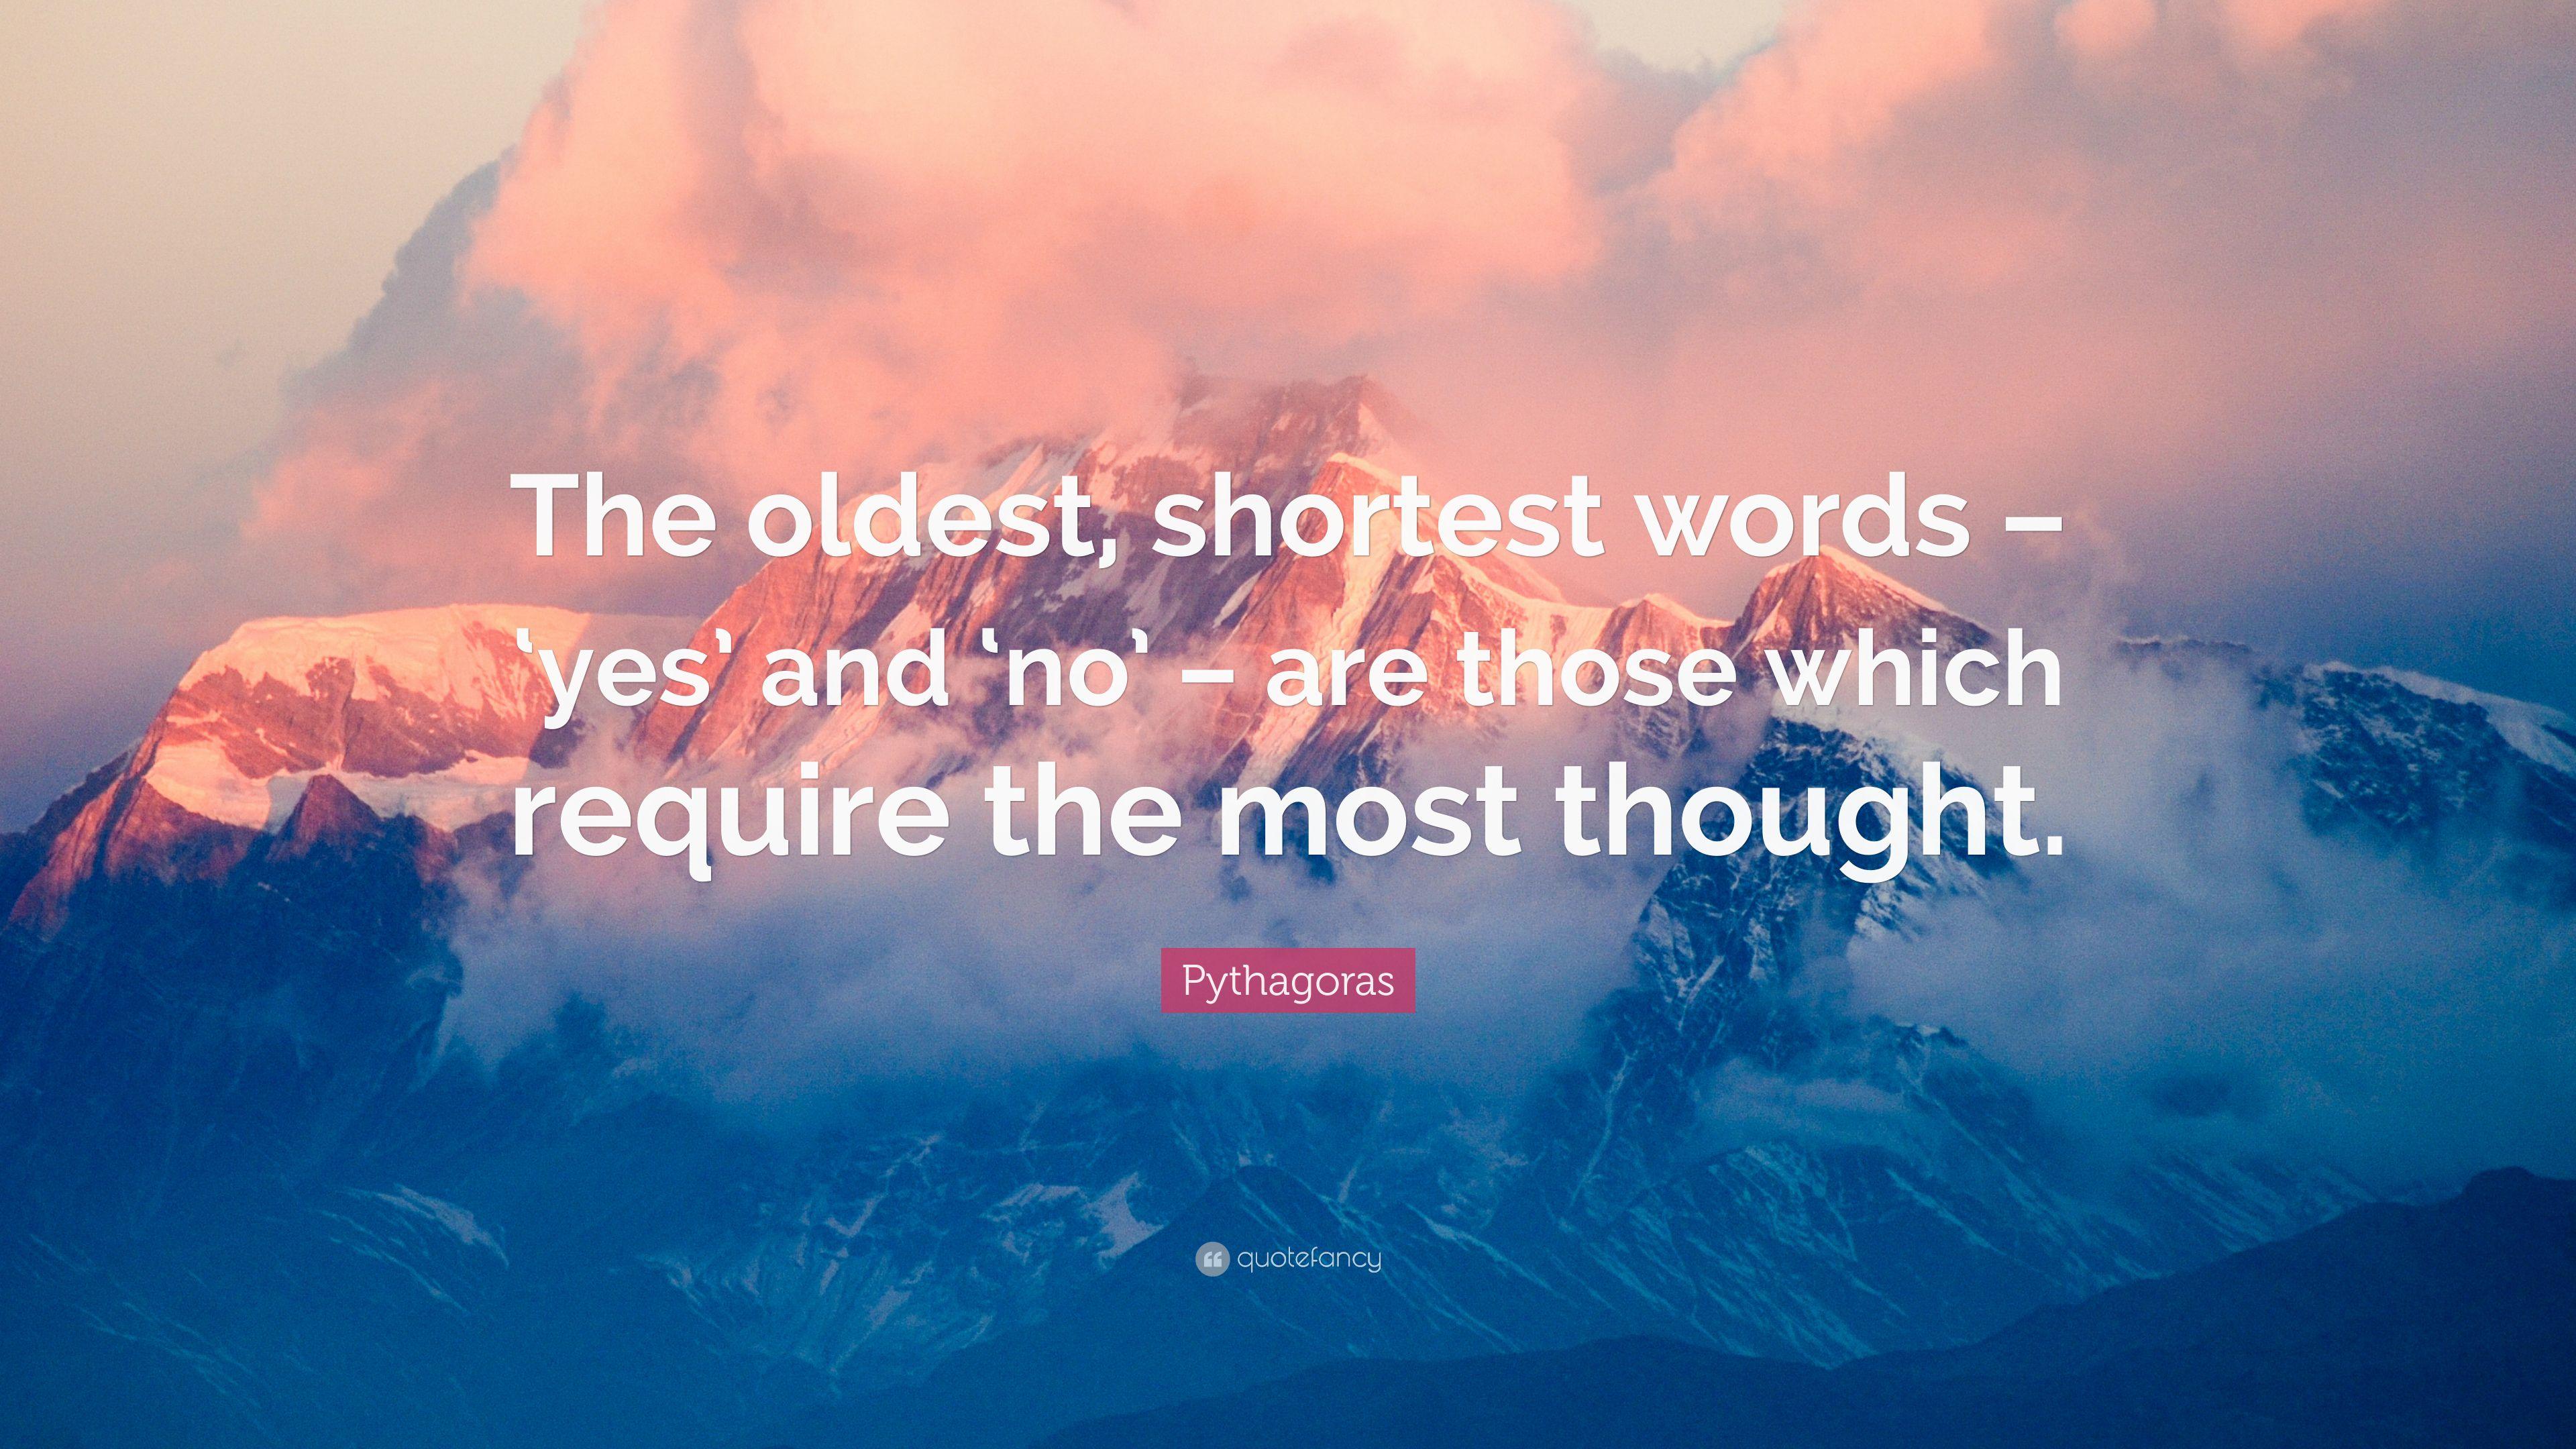 Pythagoras Quote: “The oldest, shortest words